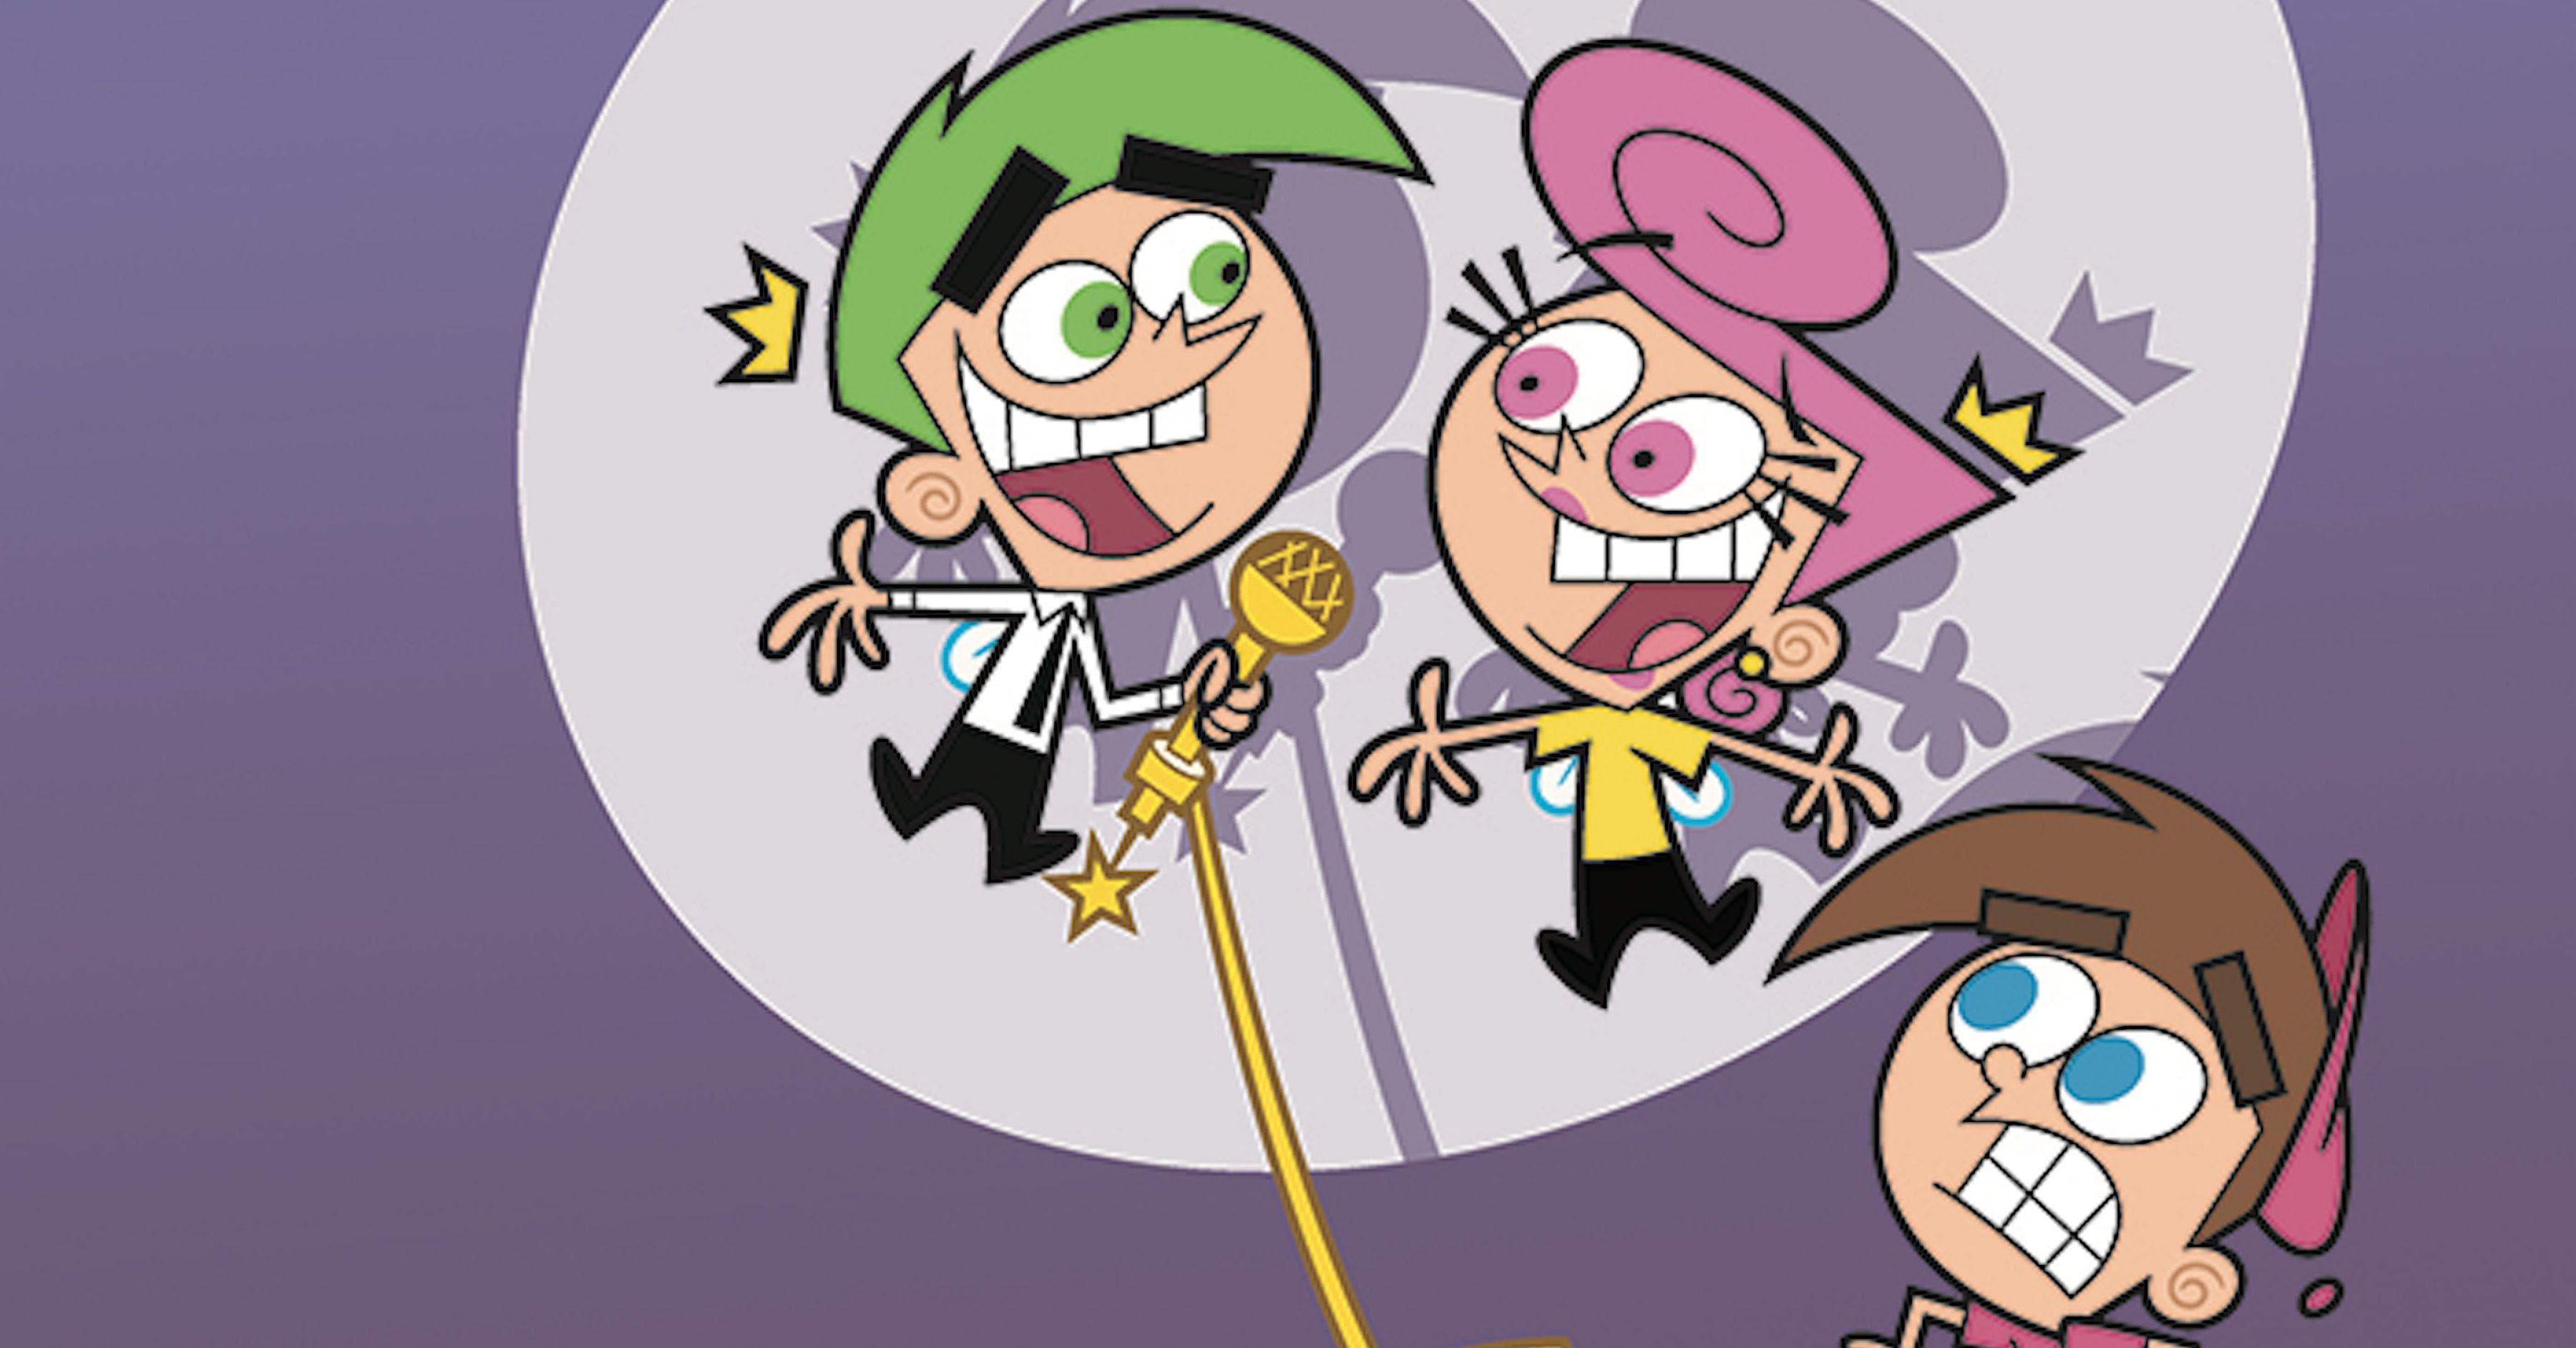 Fairly Oddparents Porn Summer Camp - The Fairly OddParents' Fan Theories That Make A Lot Of Sense